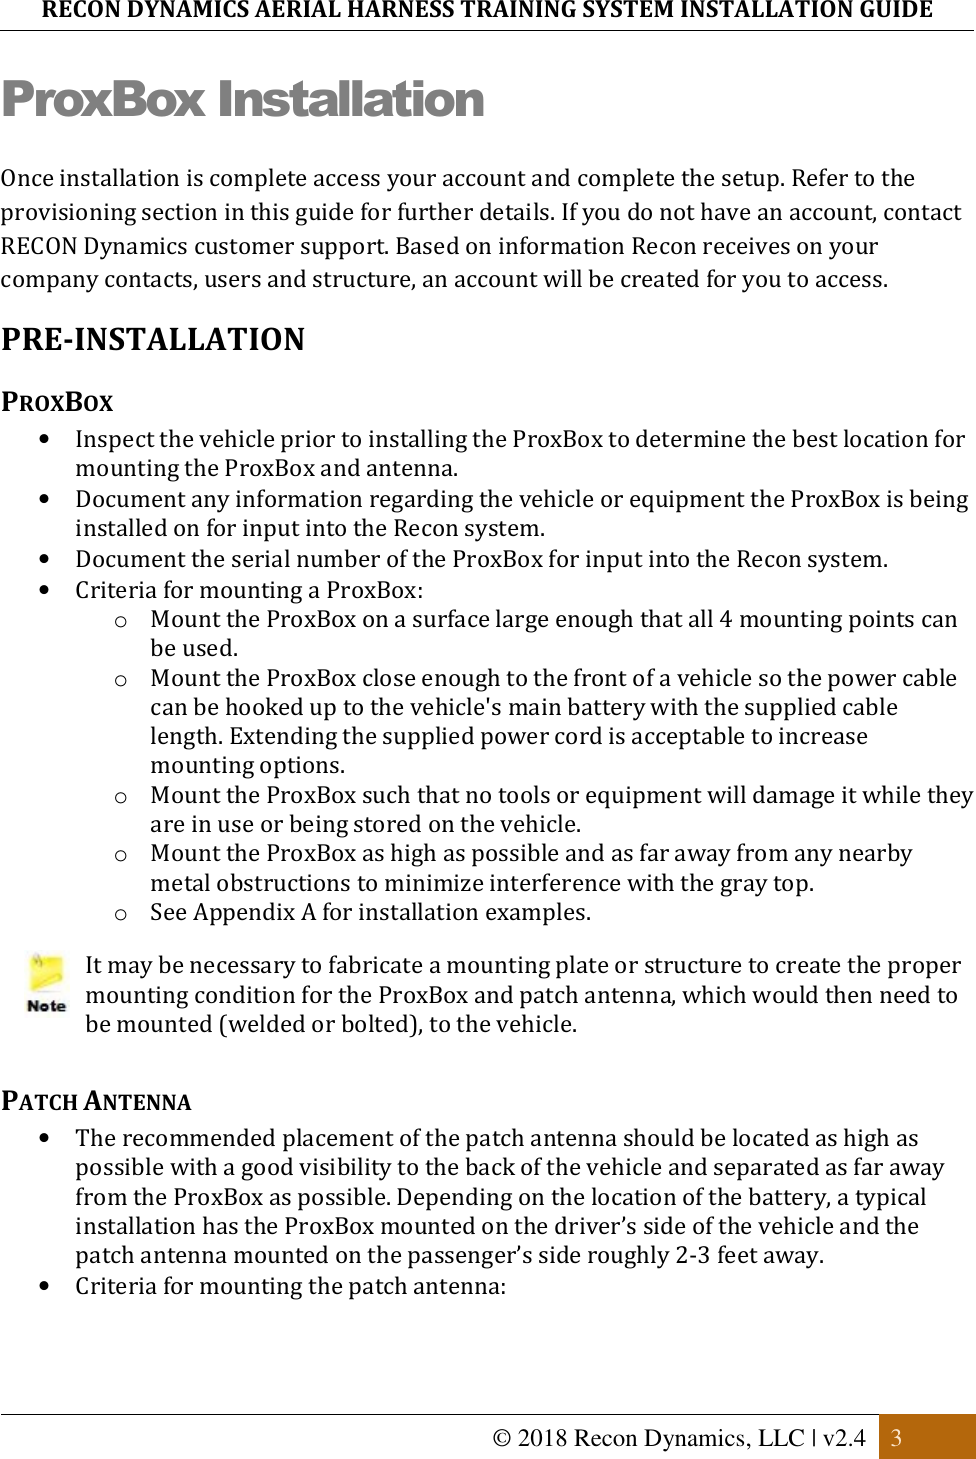 RECON DYNAMICS AERIAL HARNESS TRAINING SYSTEM INSTALLATION GUIDE   © 2018 Recon Dynamics, LLC | v2.4  3  ProxBox Installation Once installation is complete access your account and complete the setup. Refer to the provisioning section in this guide for further details. If you do not have an account, contact RECON Dynamics customer support. Based on information Recon receives on your company contacts, users and structure, an account will be created for you to access. PRE-INSTALLATION PROXBOX • Inspect the vehicle prior to installing the ProxBox to determine the best location for mounting the ProxBox and antenna.  • Document any information regarding the vehicle or equipment the ProxBox is being installed on for input into the Recon system. • Document the serial number of the ProxBox for input into the Recon system. • Criteria for mounting a ProxBox: o Mount the ProxBox on a surface large enough that all 4 mounting points can be used. o Mount the ProxBox close enough to the front of a vehicle so the power cable can be hooked up to the vehicle&apos;s main battery with the supplied cable length. Extending the supplied power cord is acceptable to increase mounting options. o Mount the ProxBox such that no tools or equipment will damage it while they are in use or being stored on the vehicle.  o Mount the ProxBox as high as possible and as far away from any nearby metal obstructions to minimize interference with the gray top. o See Appendix A for installation examples.  It may be necessary to fabricate a mounting plate or structure to create the proper mounting condition for the ProxBox and patch antenna, which would then need to be mounted (welded or bolted), to the vehicle.  PATCH ANTENNA • The recommended placement of the patch antenna should be located as high as possible with a good visibility to the back of the vehicle and separated as far away from the ProxBox as possible. Depending on the location of the battery, a typical installation has the ProxBox mounted on the driver’s side of the vehicle and the patch antenna mounted on the passenger’s side roughly 2-3 feet away. • Criteria for mounting the patch antenna: 